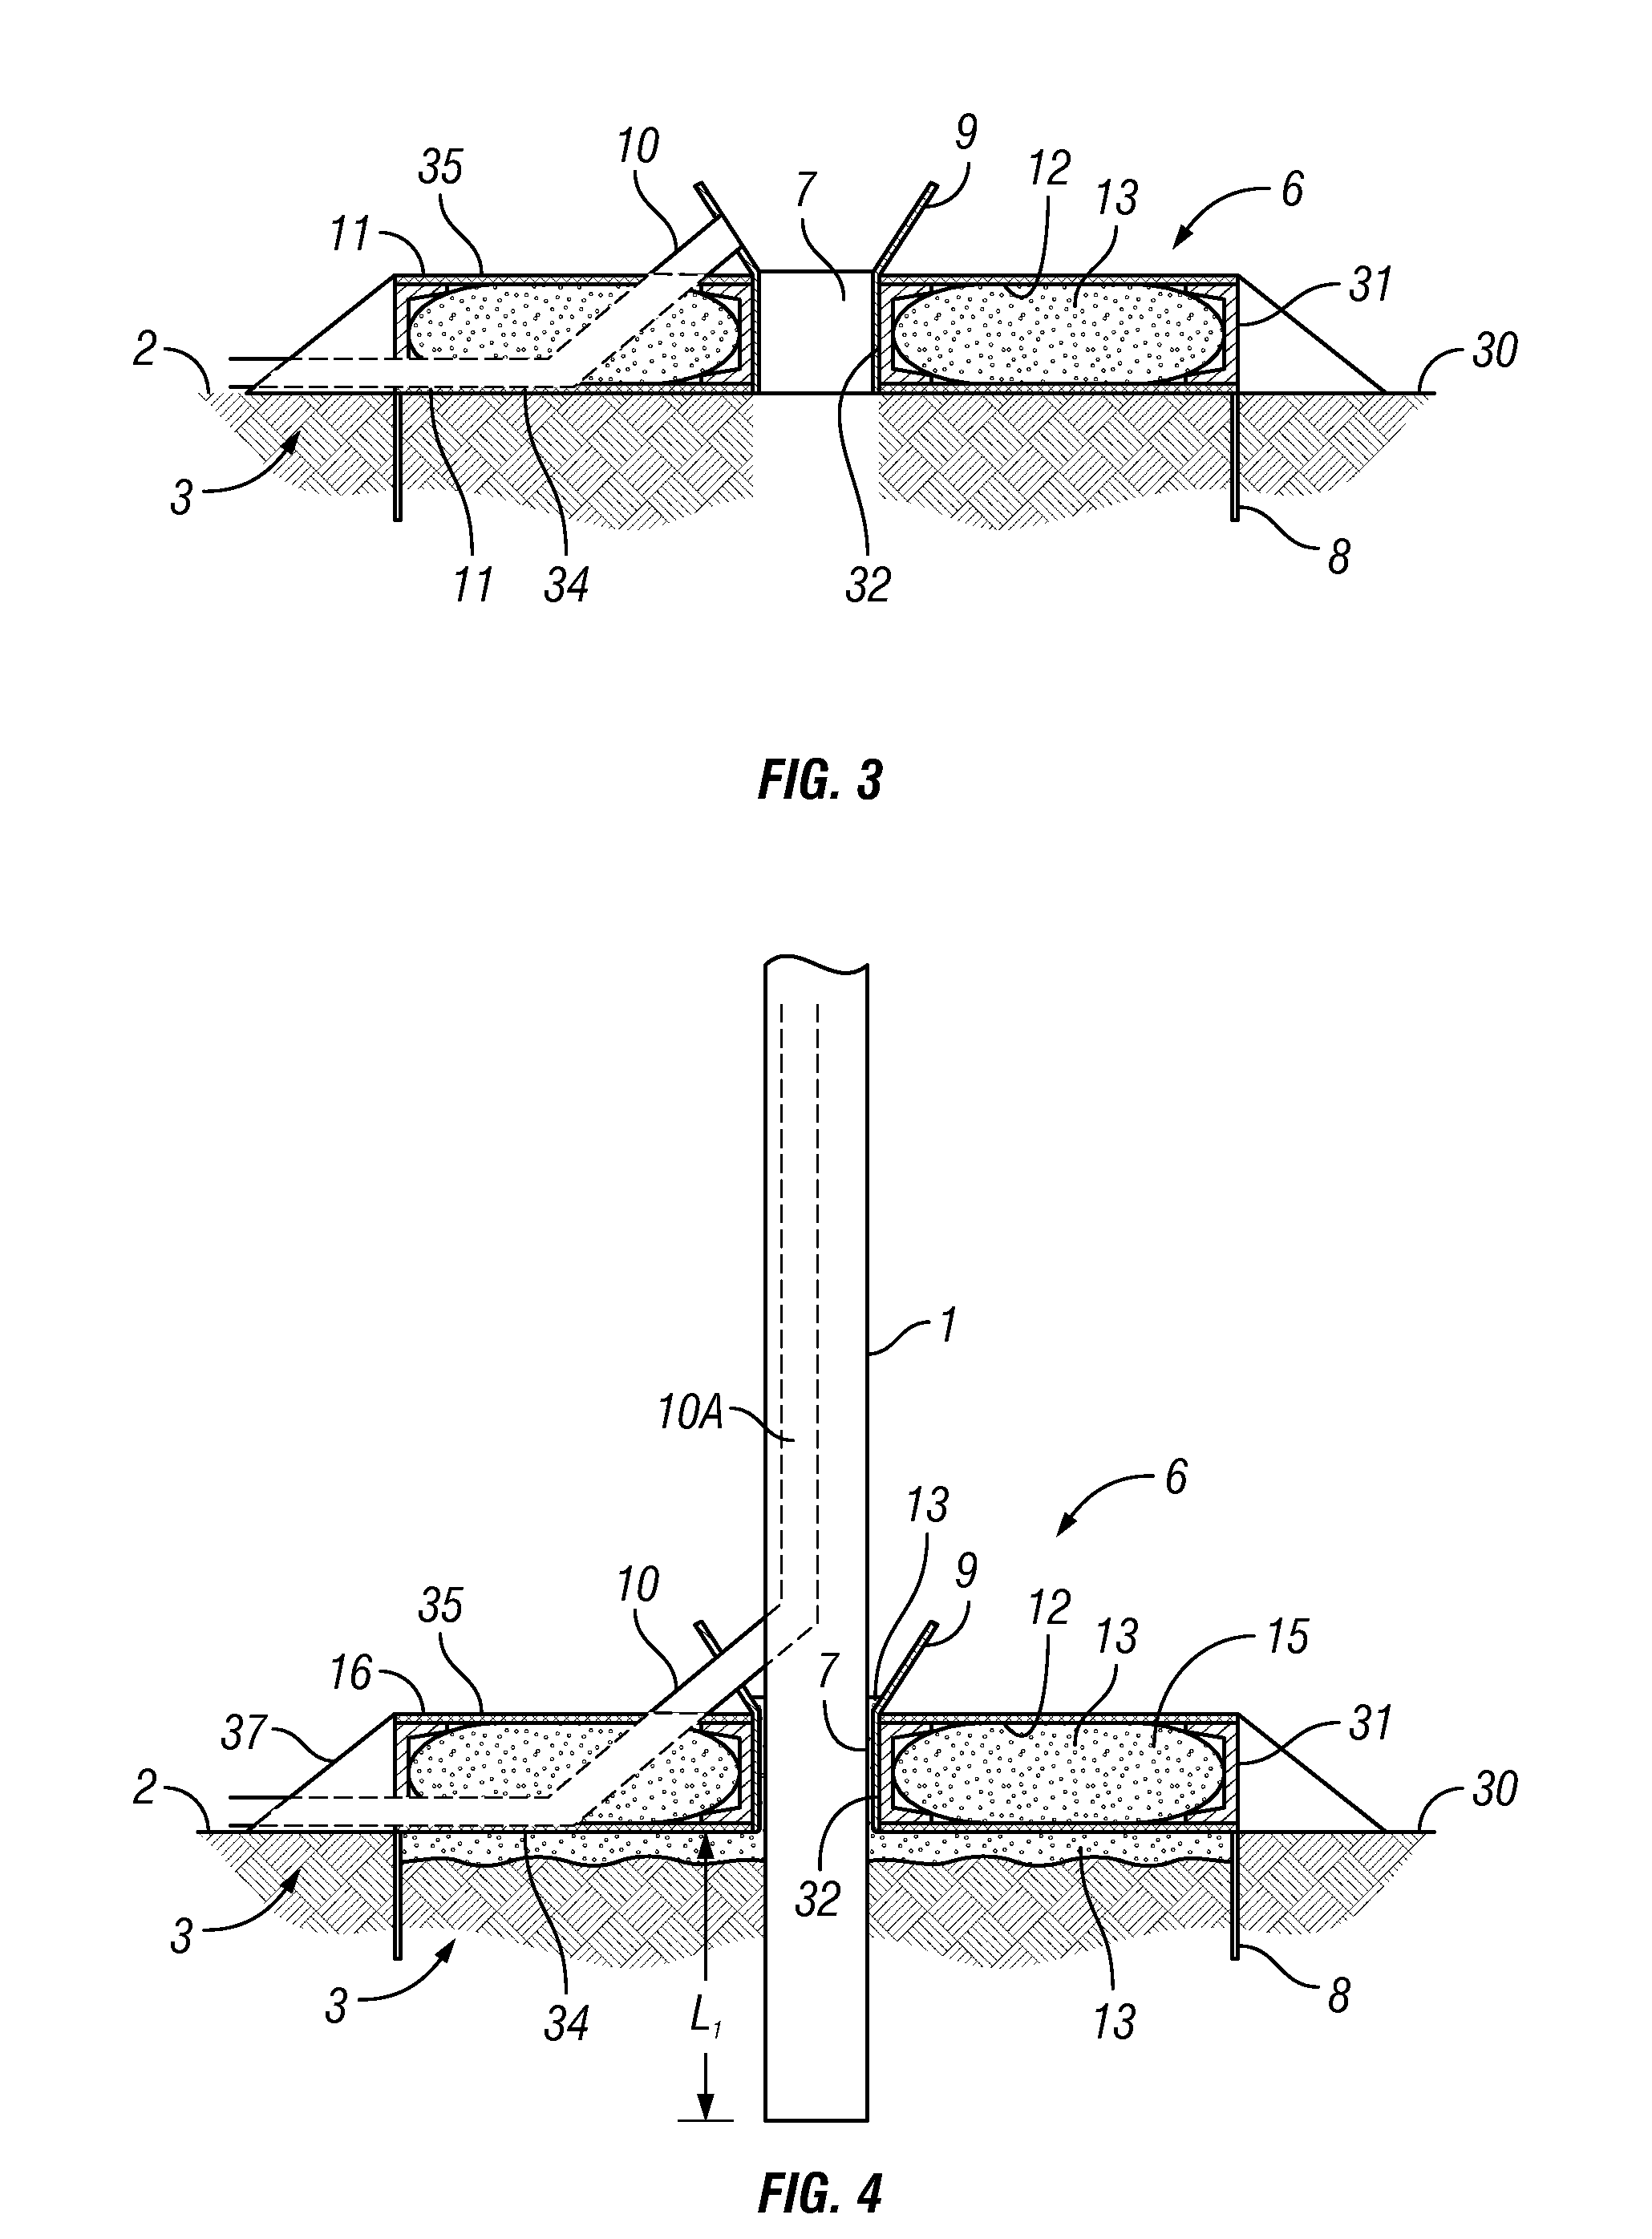 Anti-scour disk and method